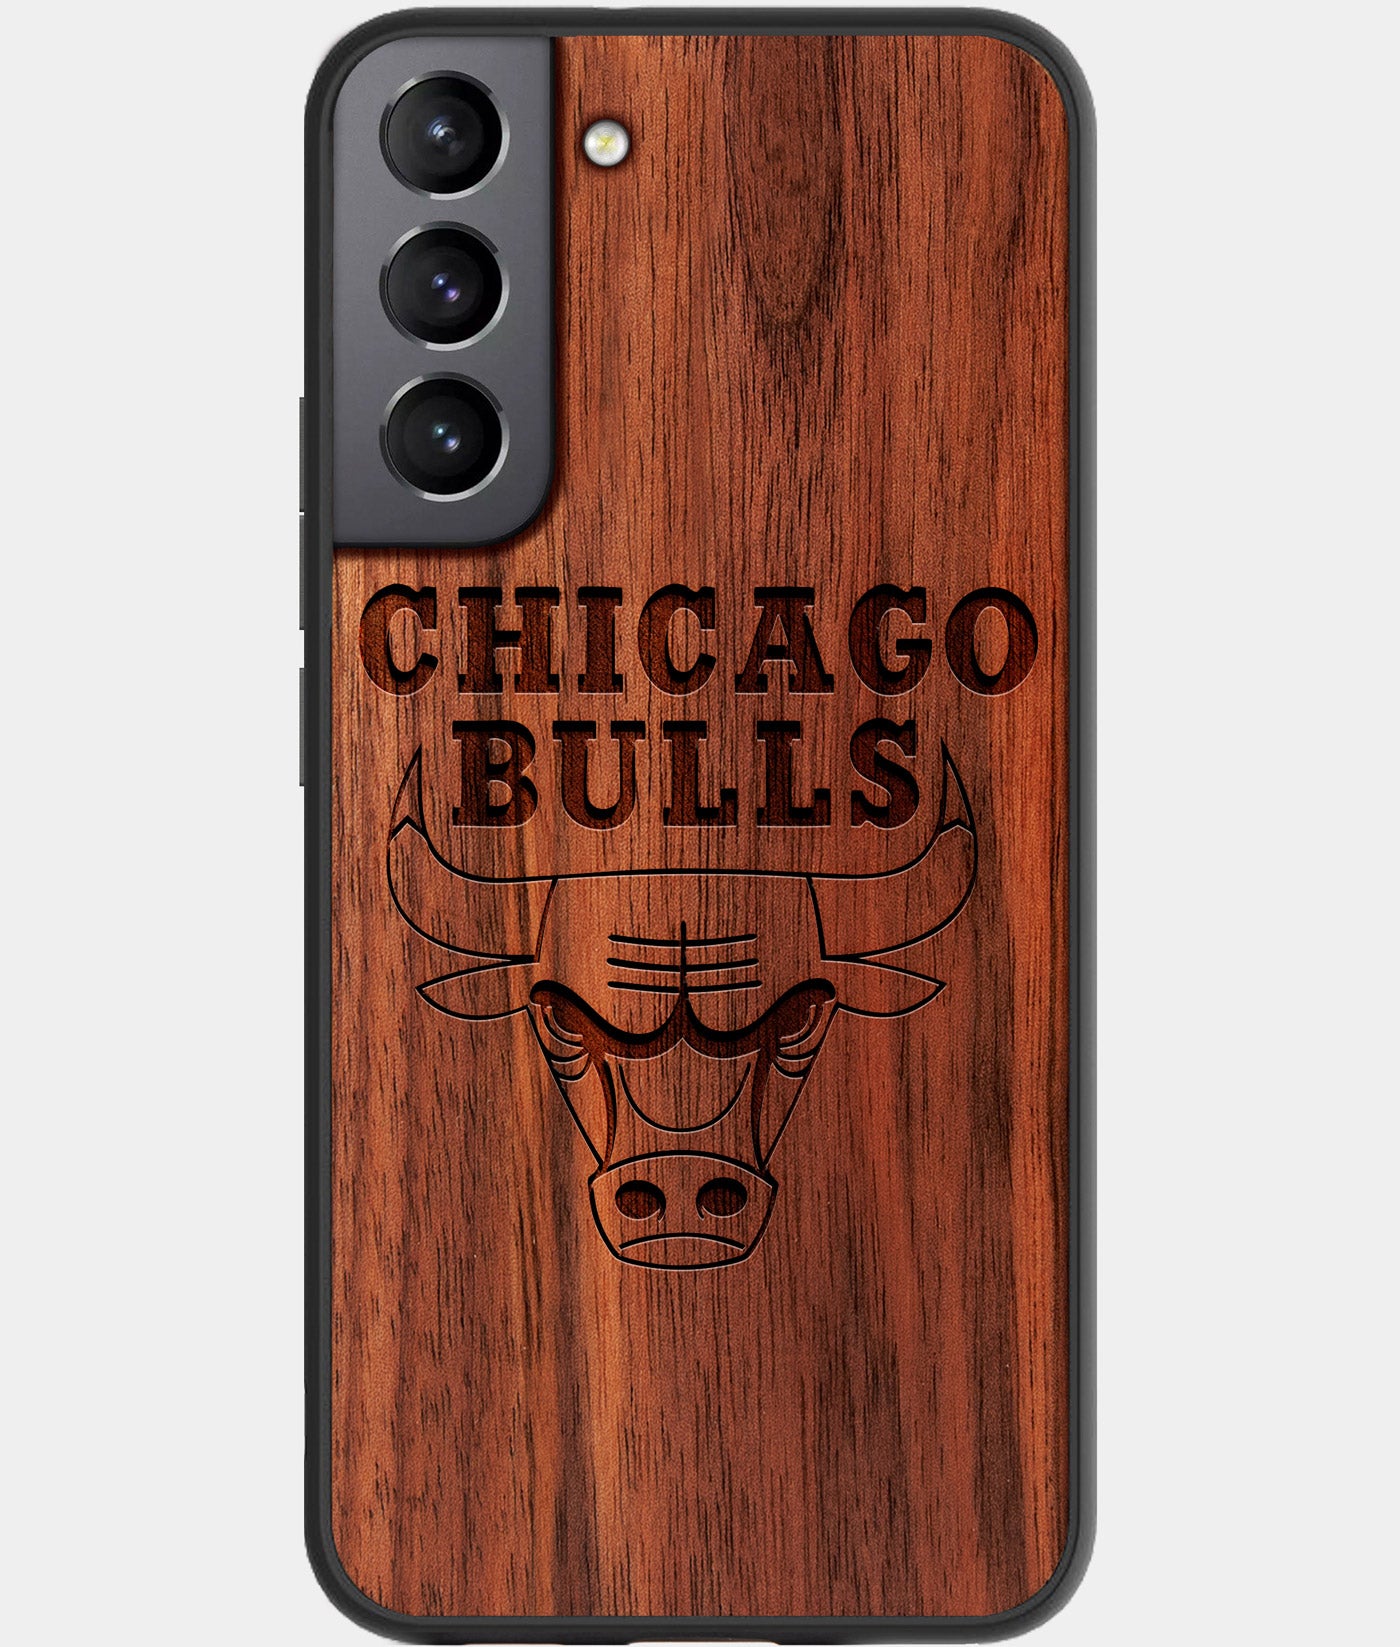 Best Walnut Wood Chicago Bulls Galaxy S21 FE Case - Custom Engraved Cover - Engraved In Nature